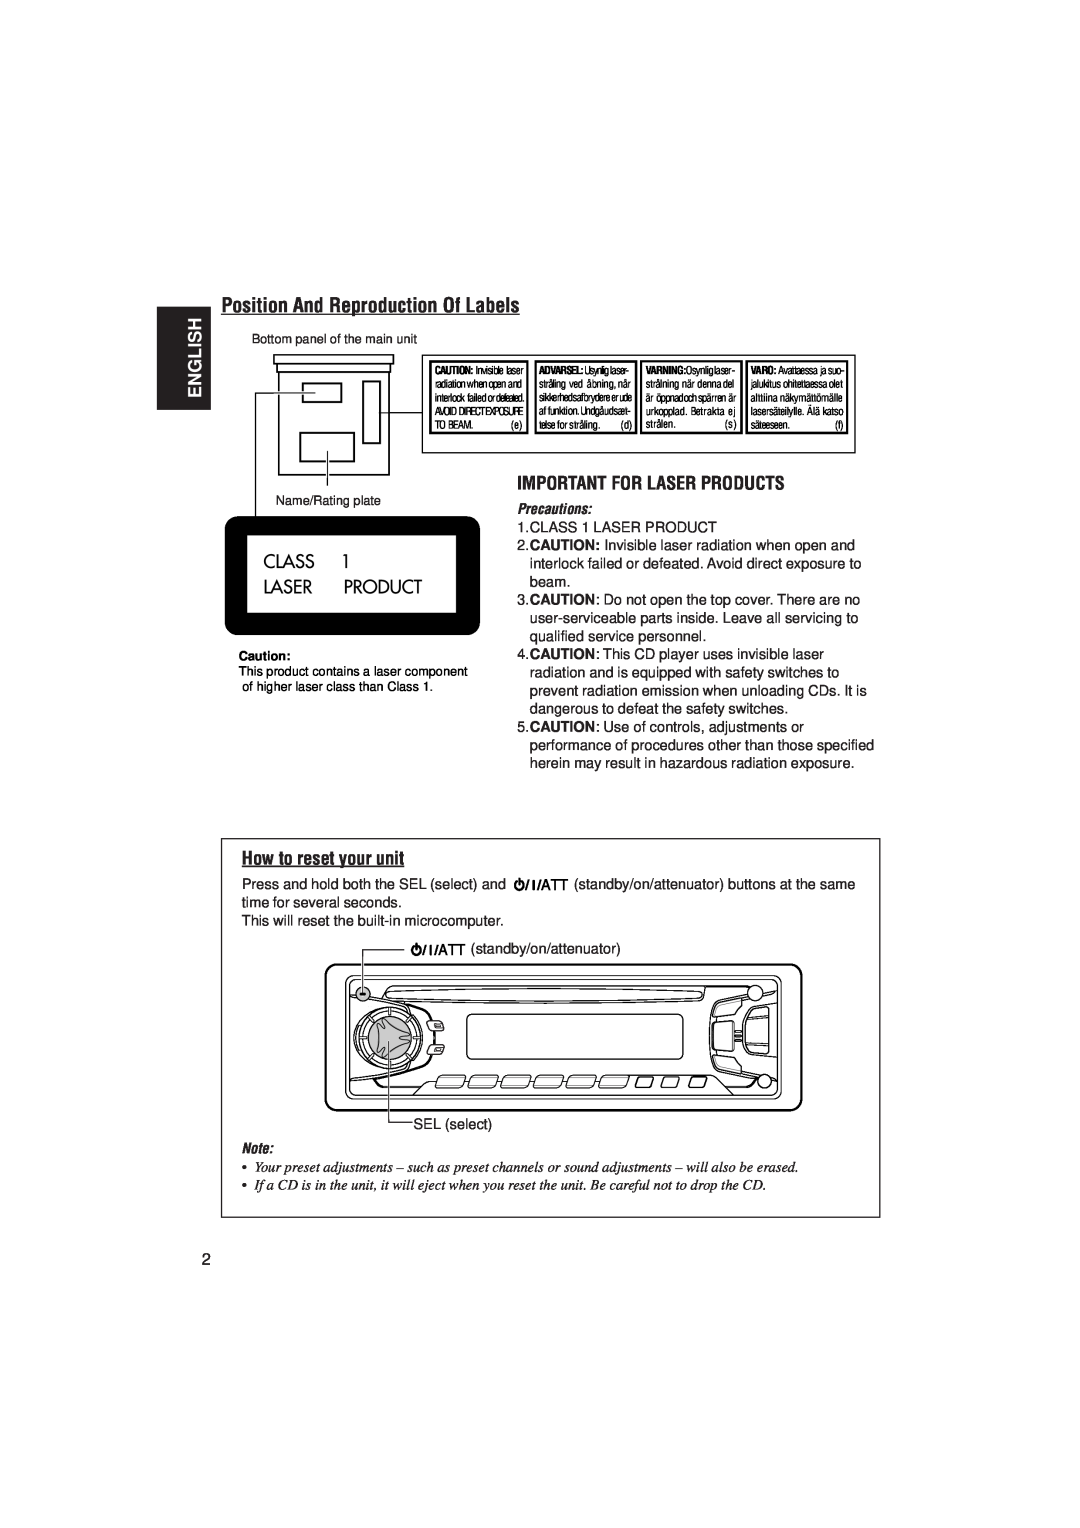 JVC KD-S733R, KD-S731R Position And Reproduction Of Labels, English, Important For Laser Products, How to reset your unit 